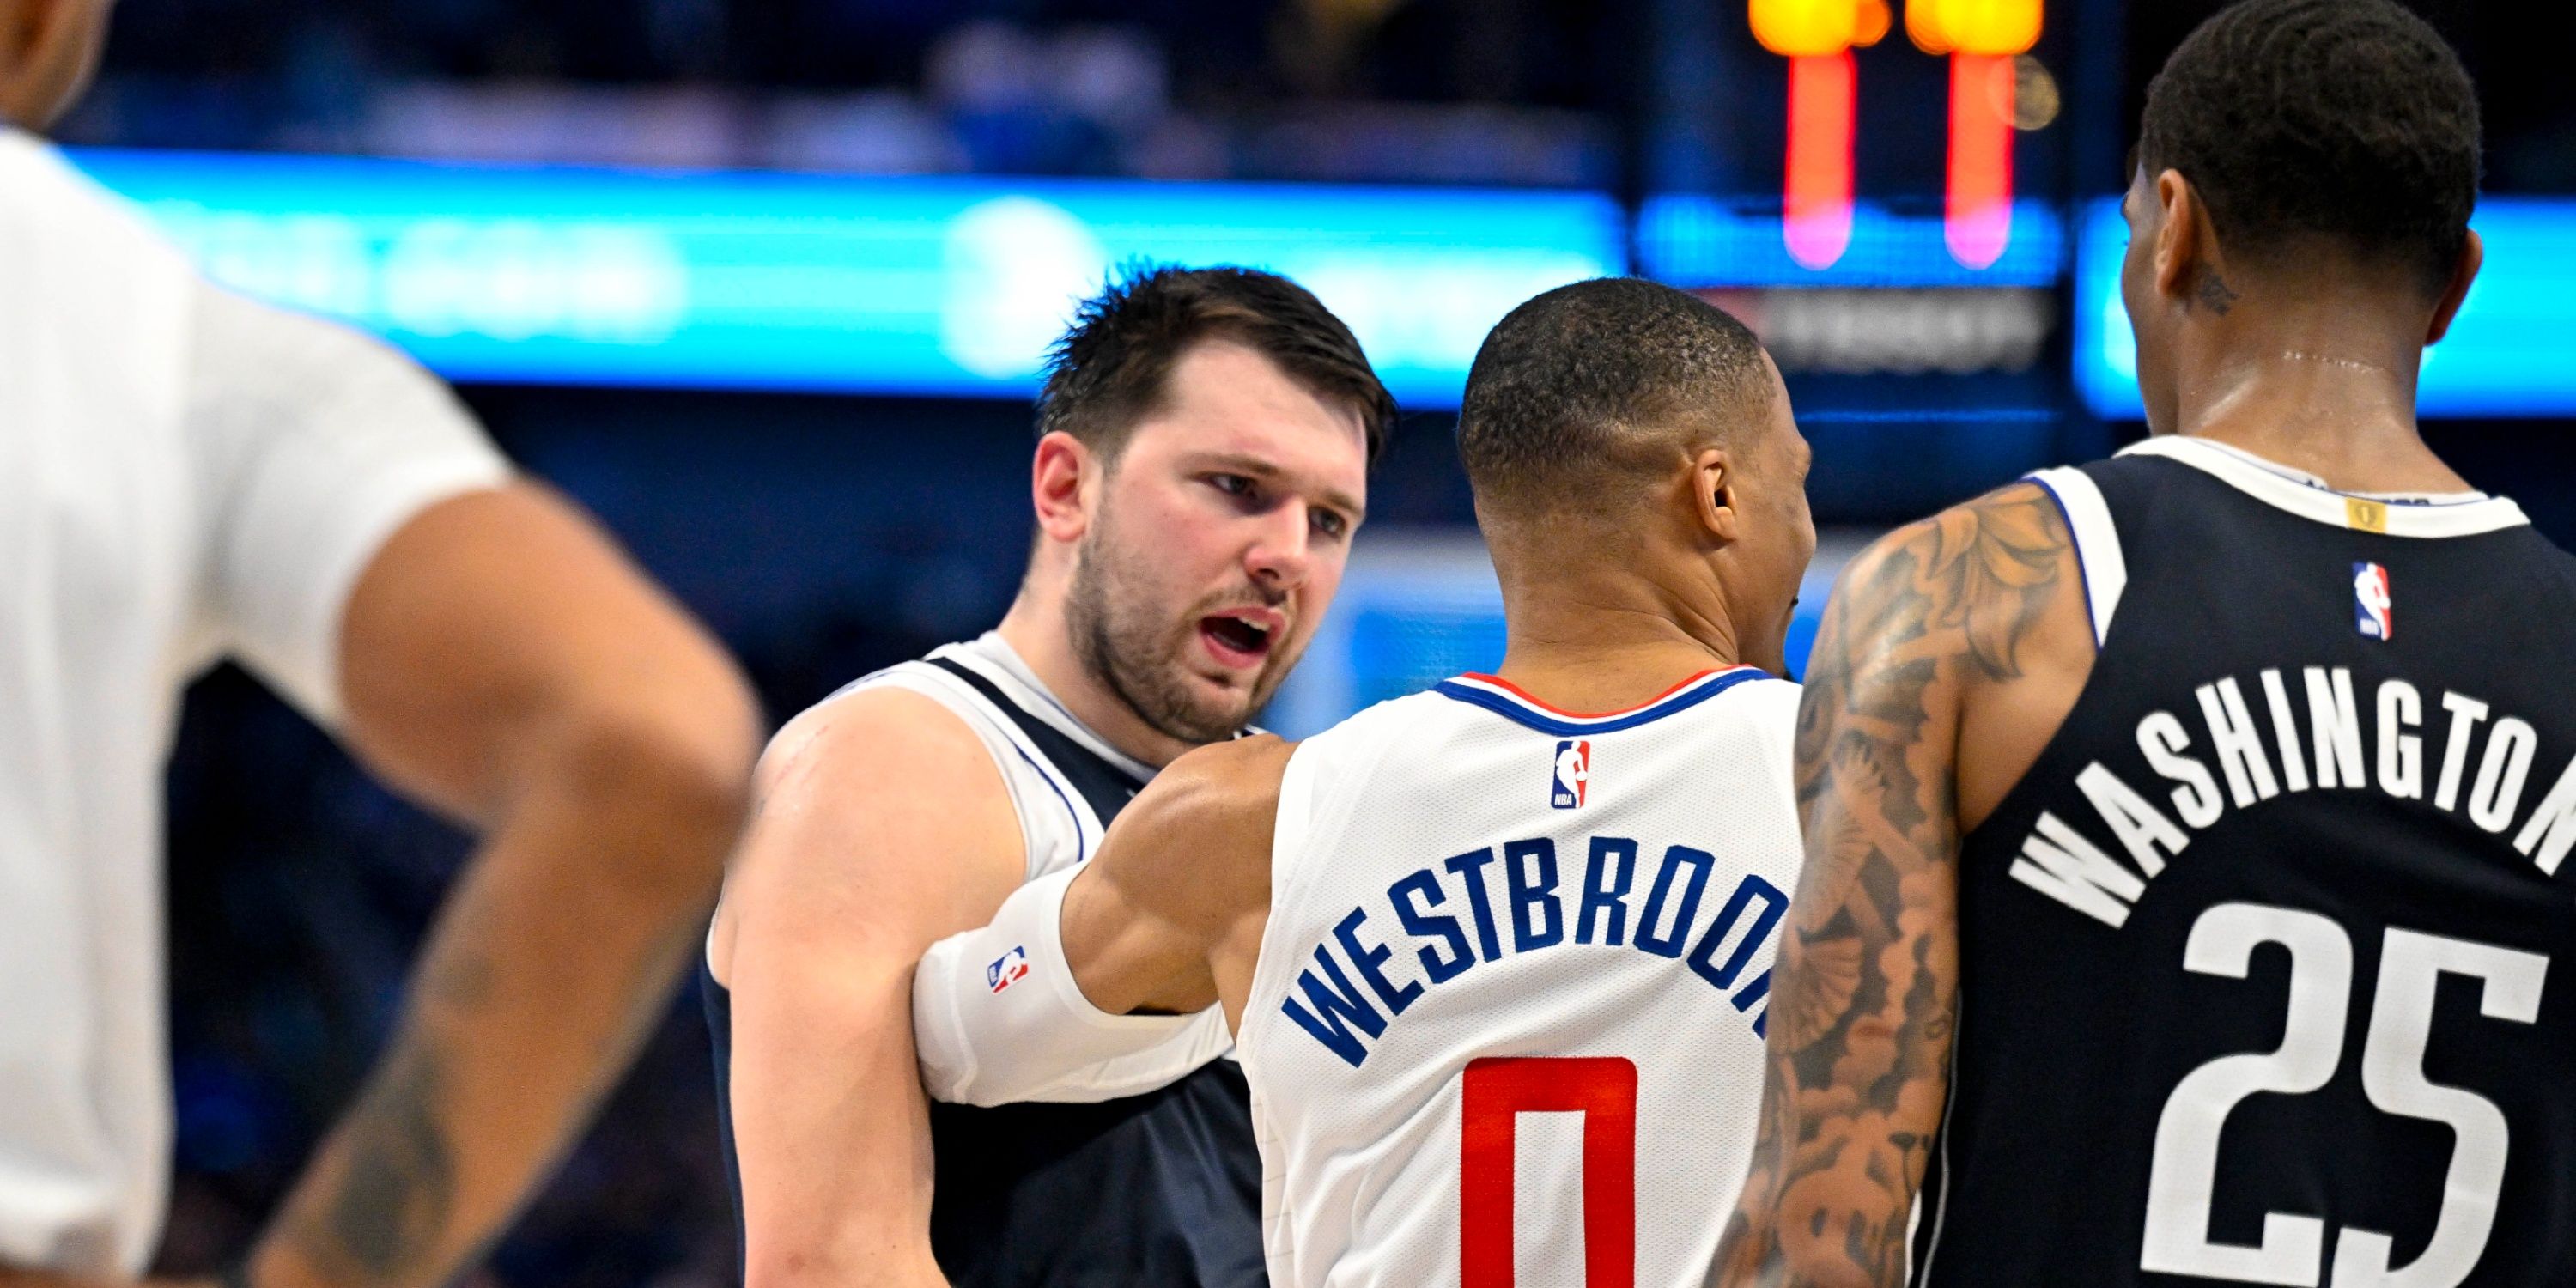 Clippers’ Westbrook, Mavericks’ Washington Jr. Ejected In Fiery Game 3